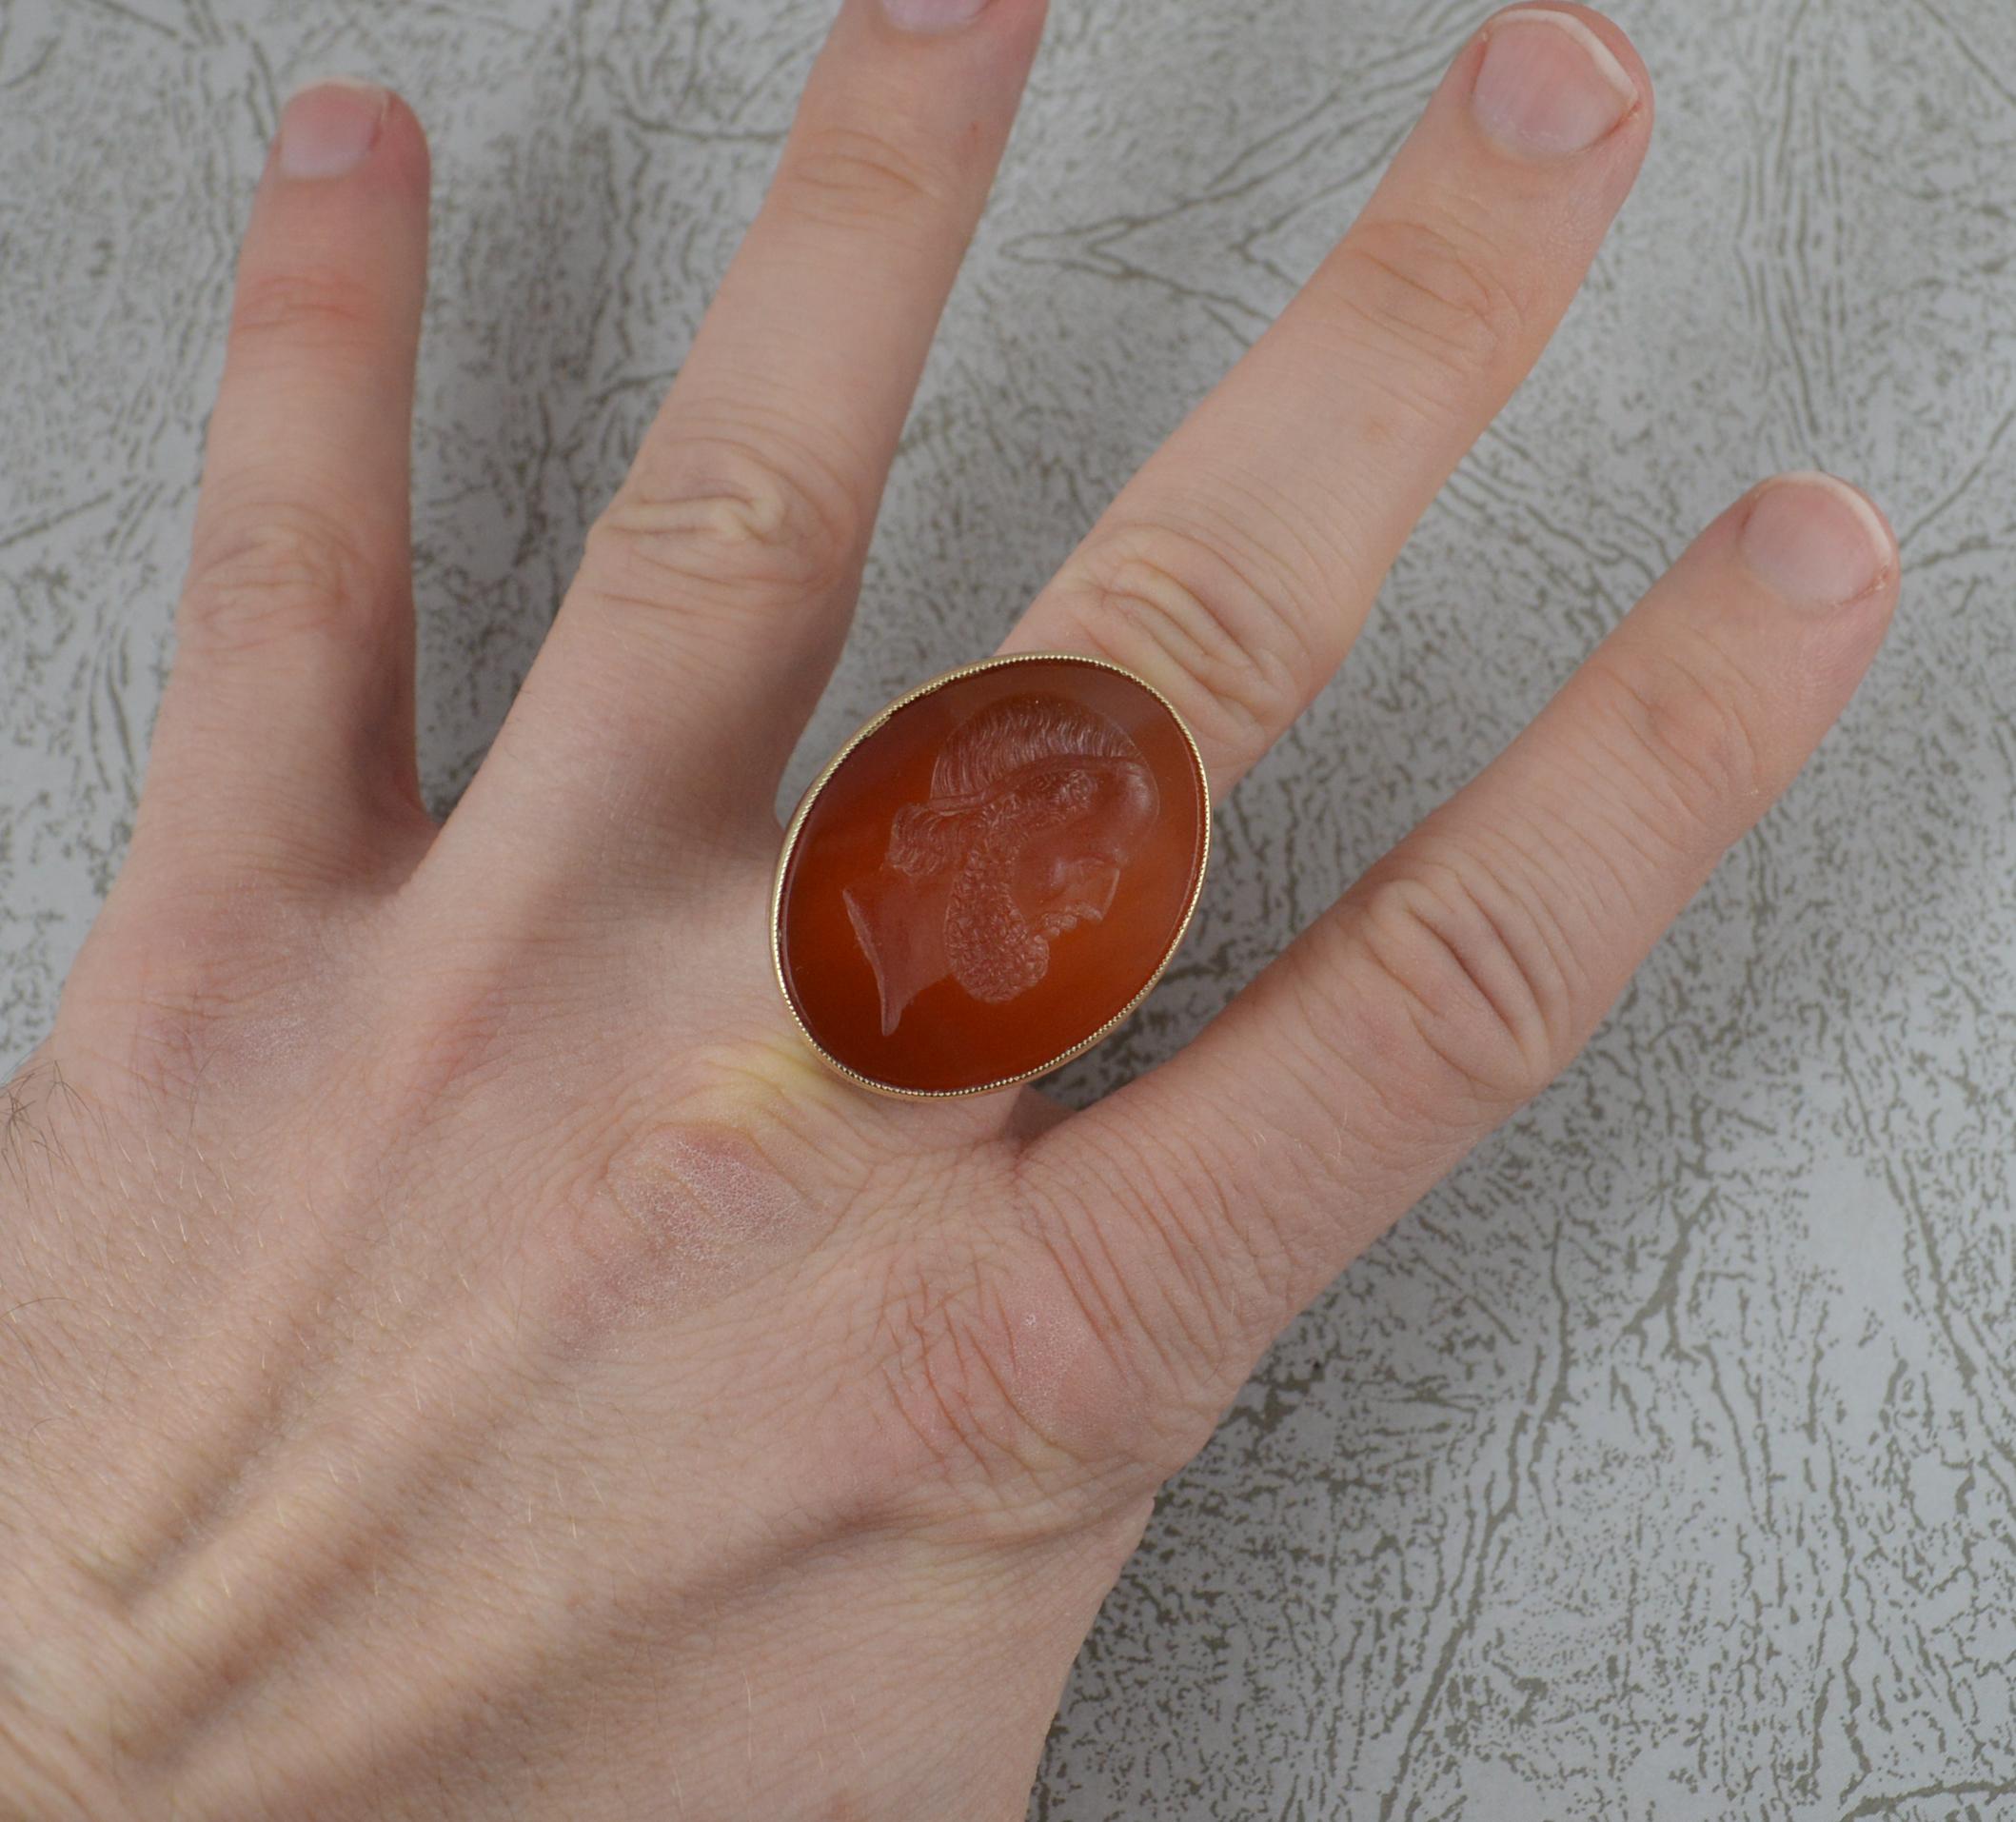 A Victorian era intaglio seal signet ring.
Solid 9 carat gold example, great size.
Oval shaped carnelian  to centre. Depicting a bust of a male figure.
23mm x 30mm stone.

CONDITION ; Very good. Clean solid shank. Well set carnelian, issue free. A